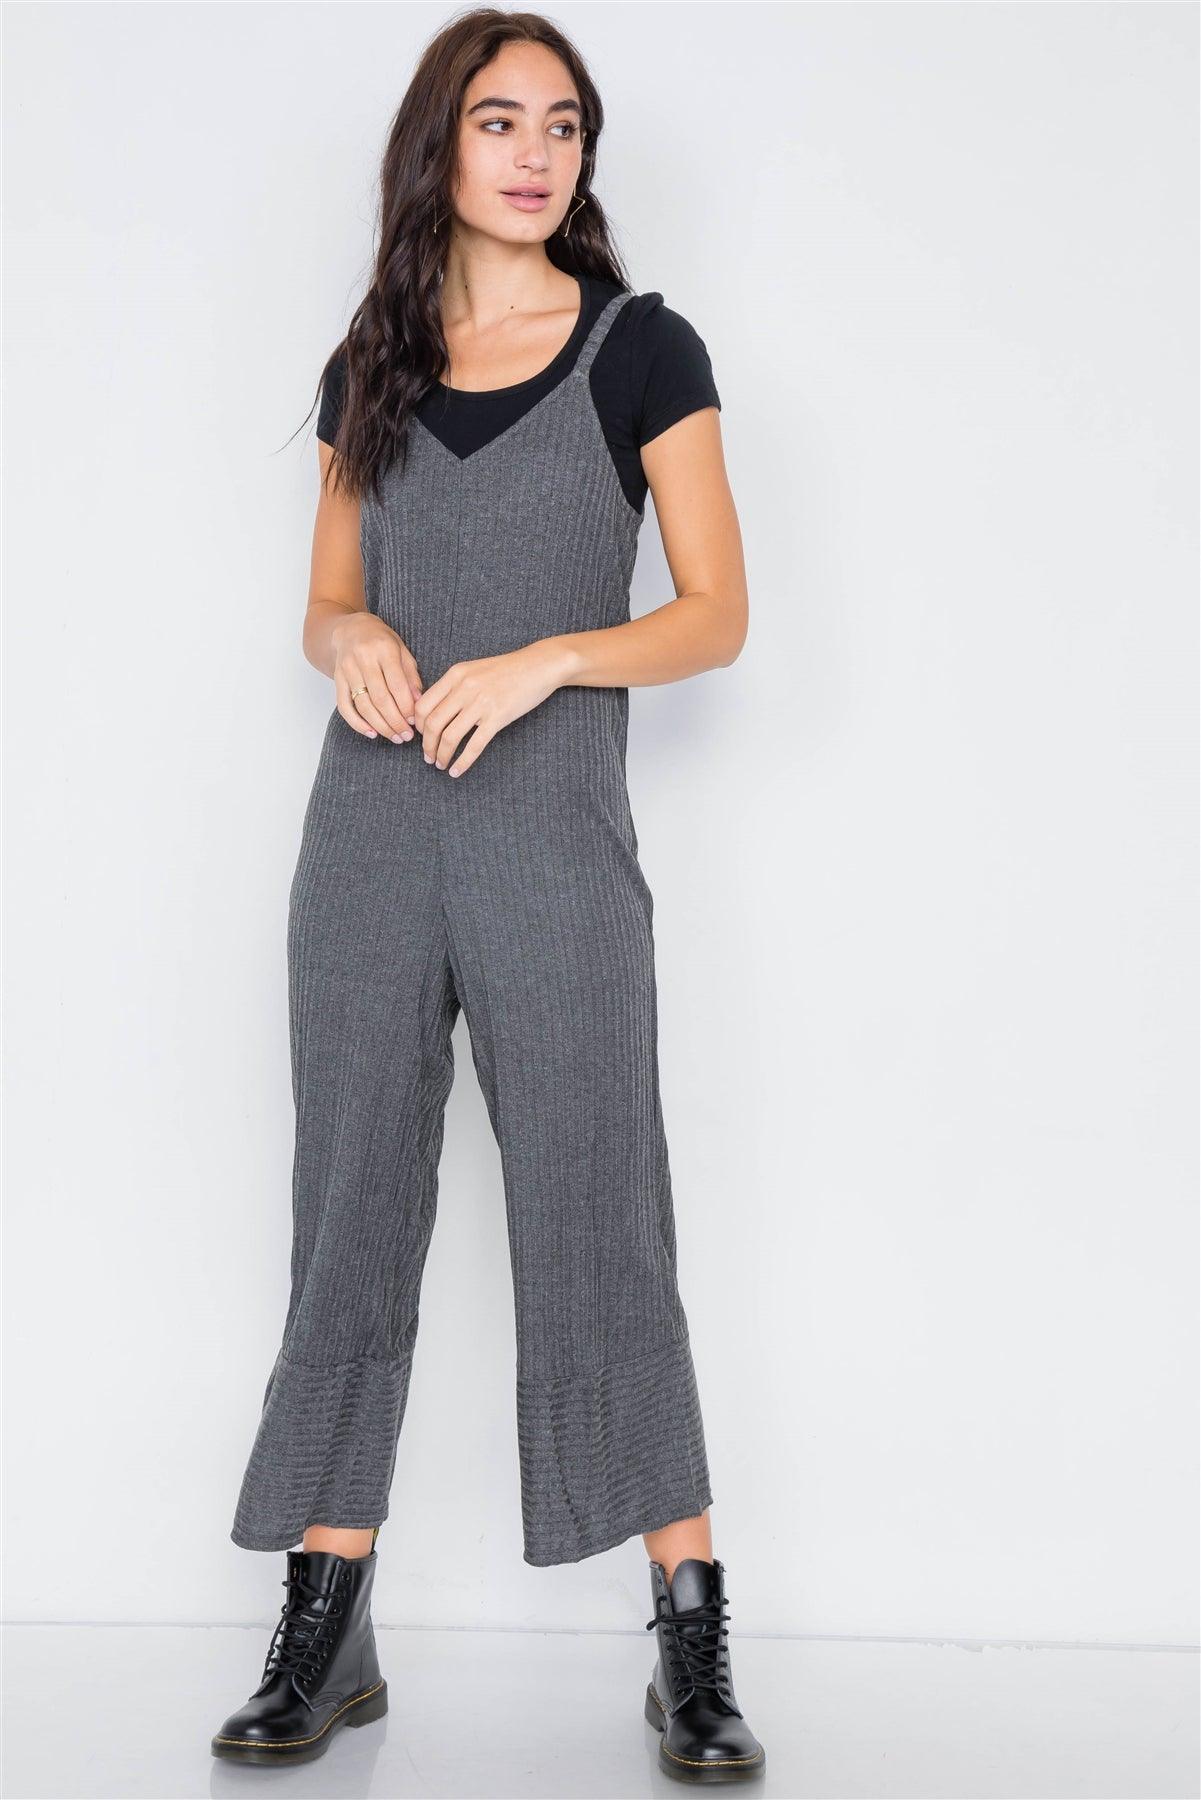 Charcoal V-Neck Ribbed Knit Gaucho Jumpsuit /3-2-1